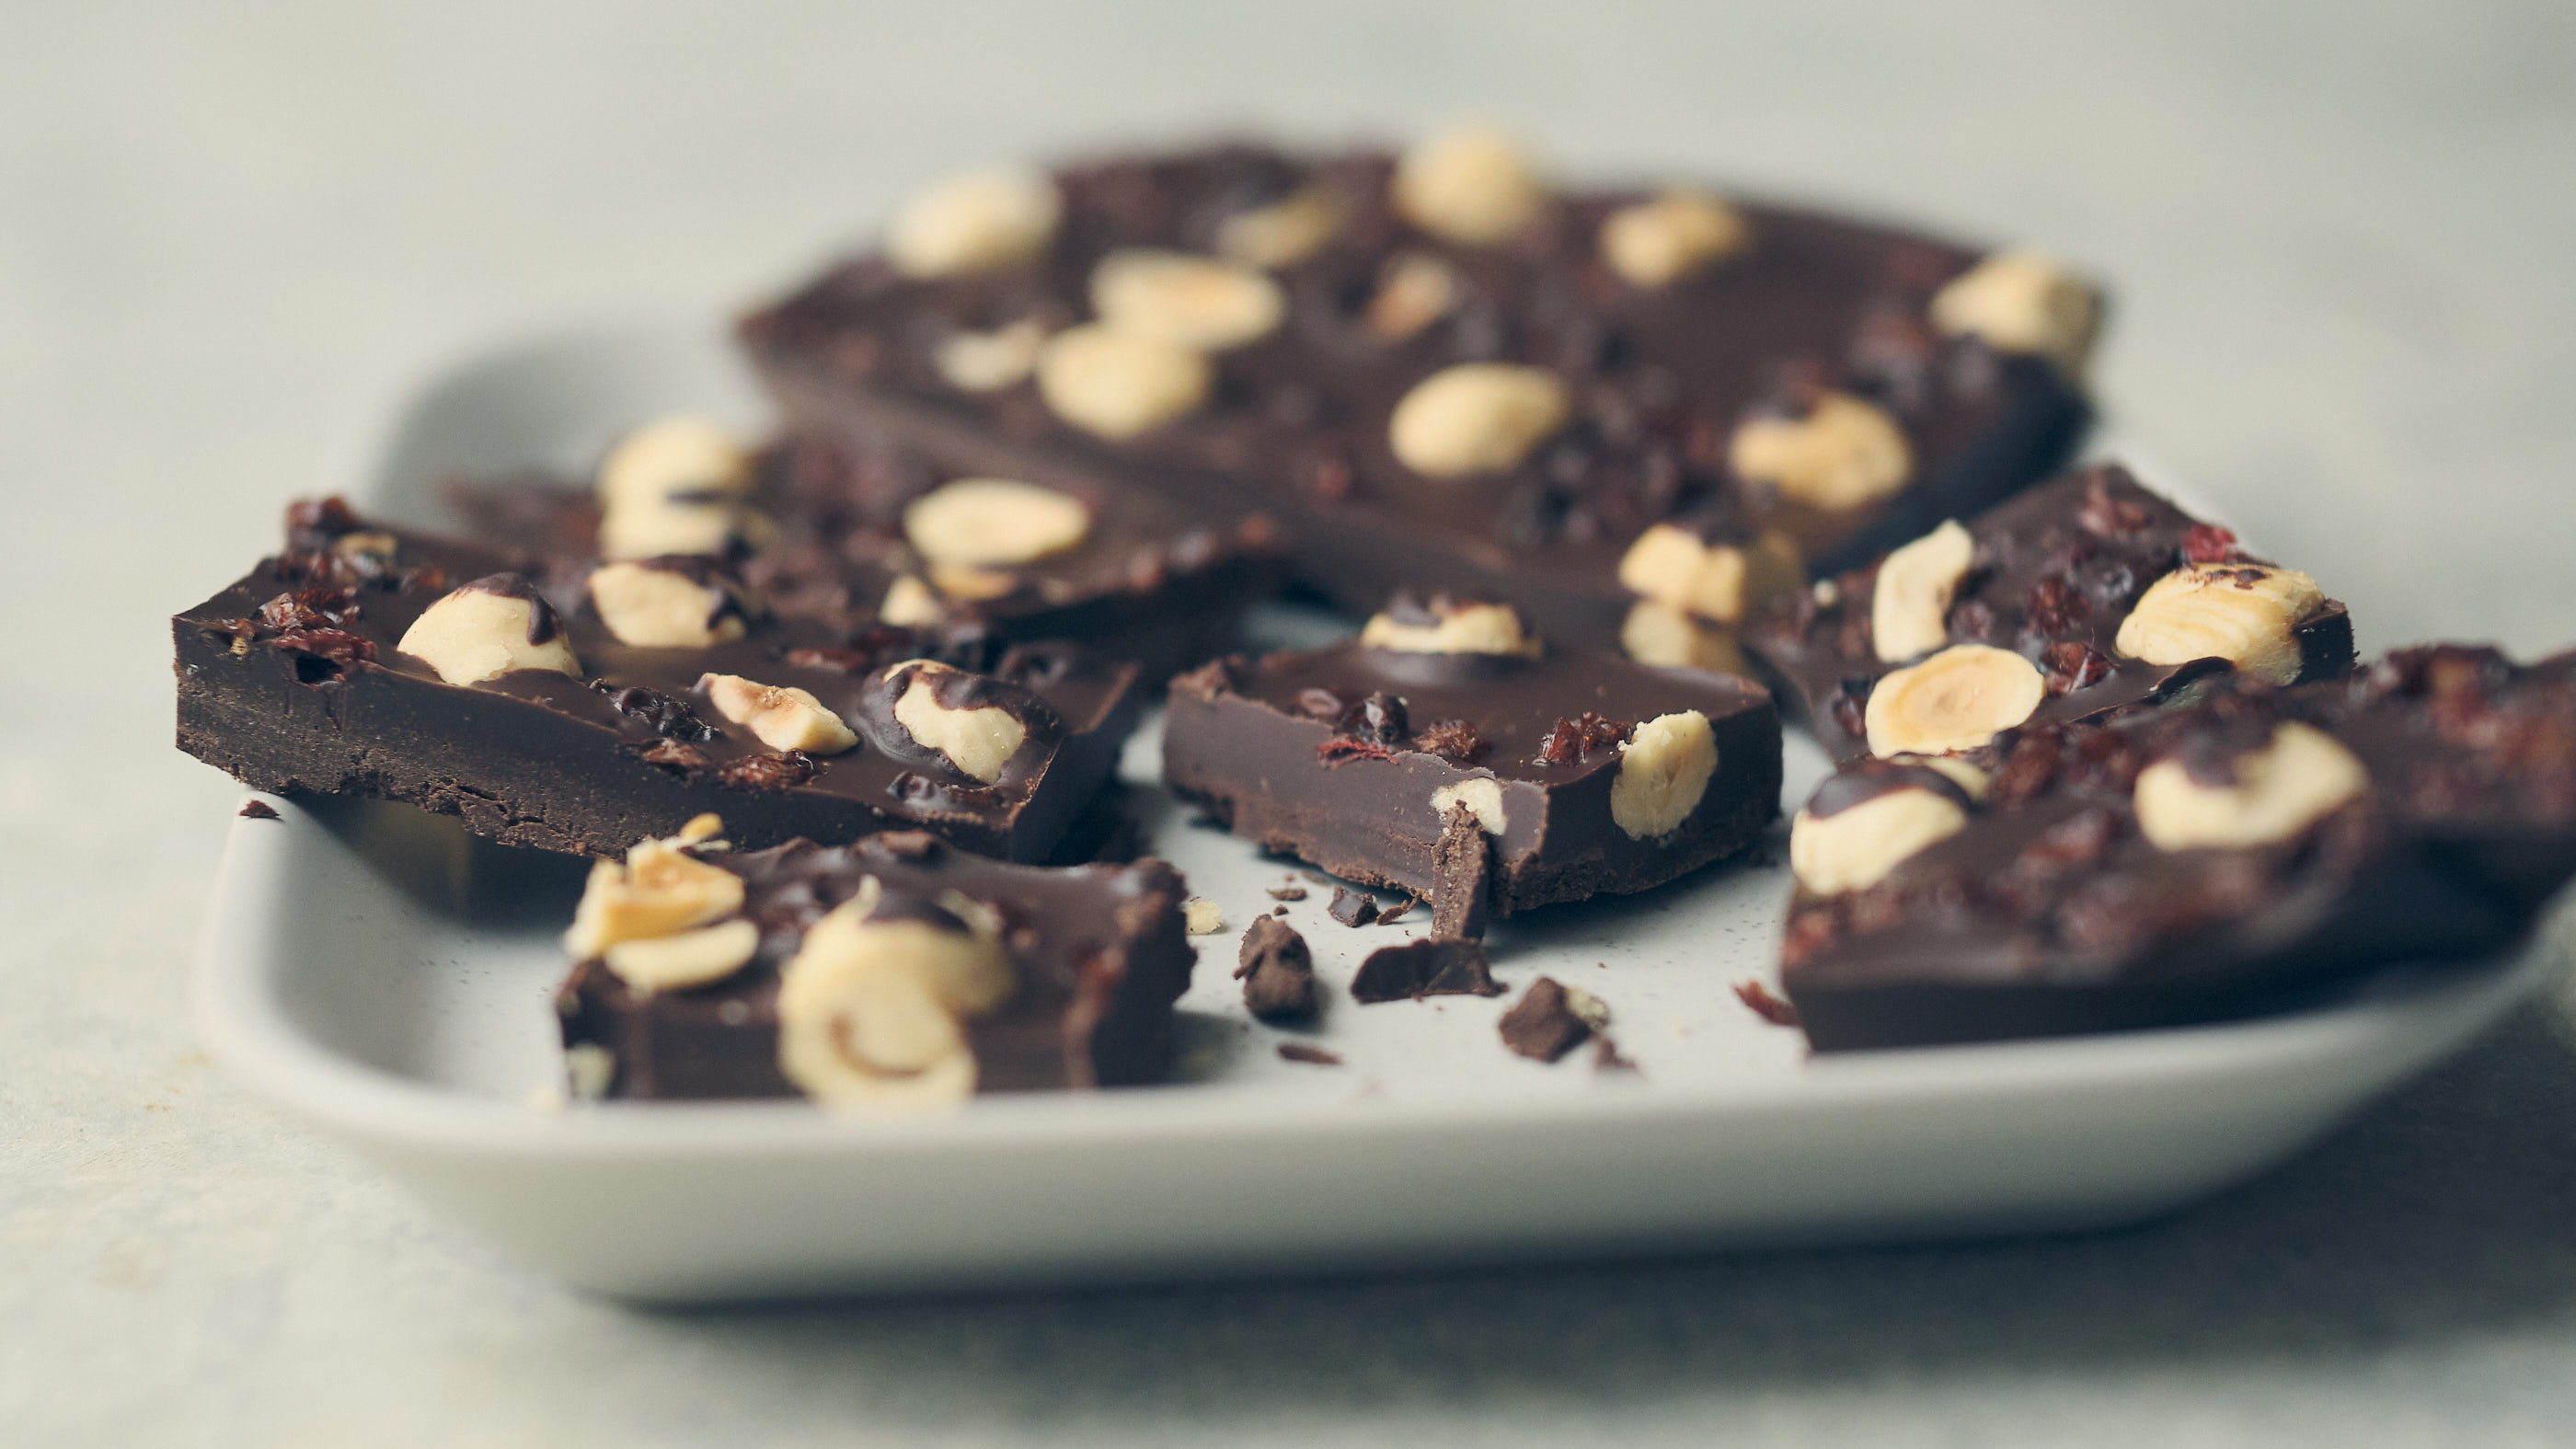 Homemade Chocolate with Hazelnuts and Barberries